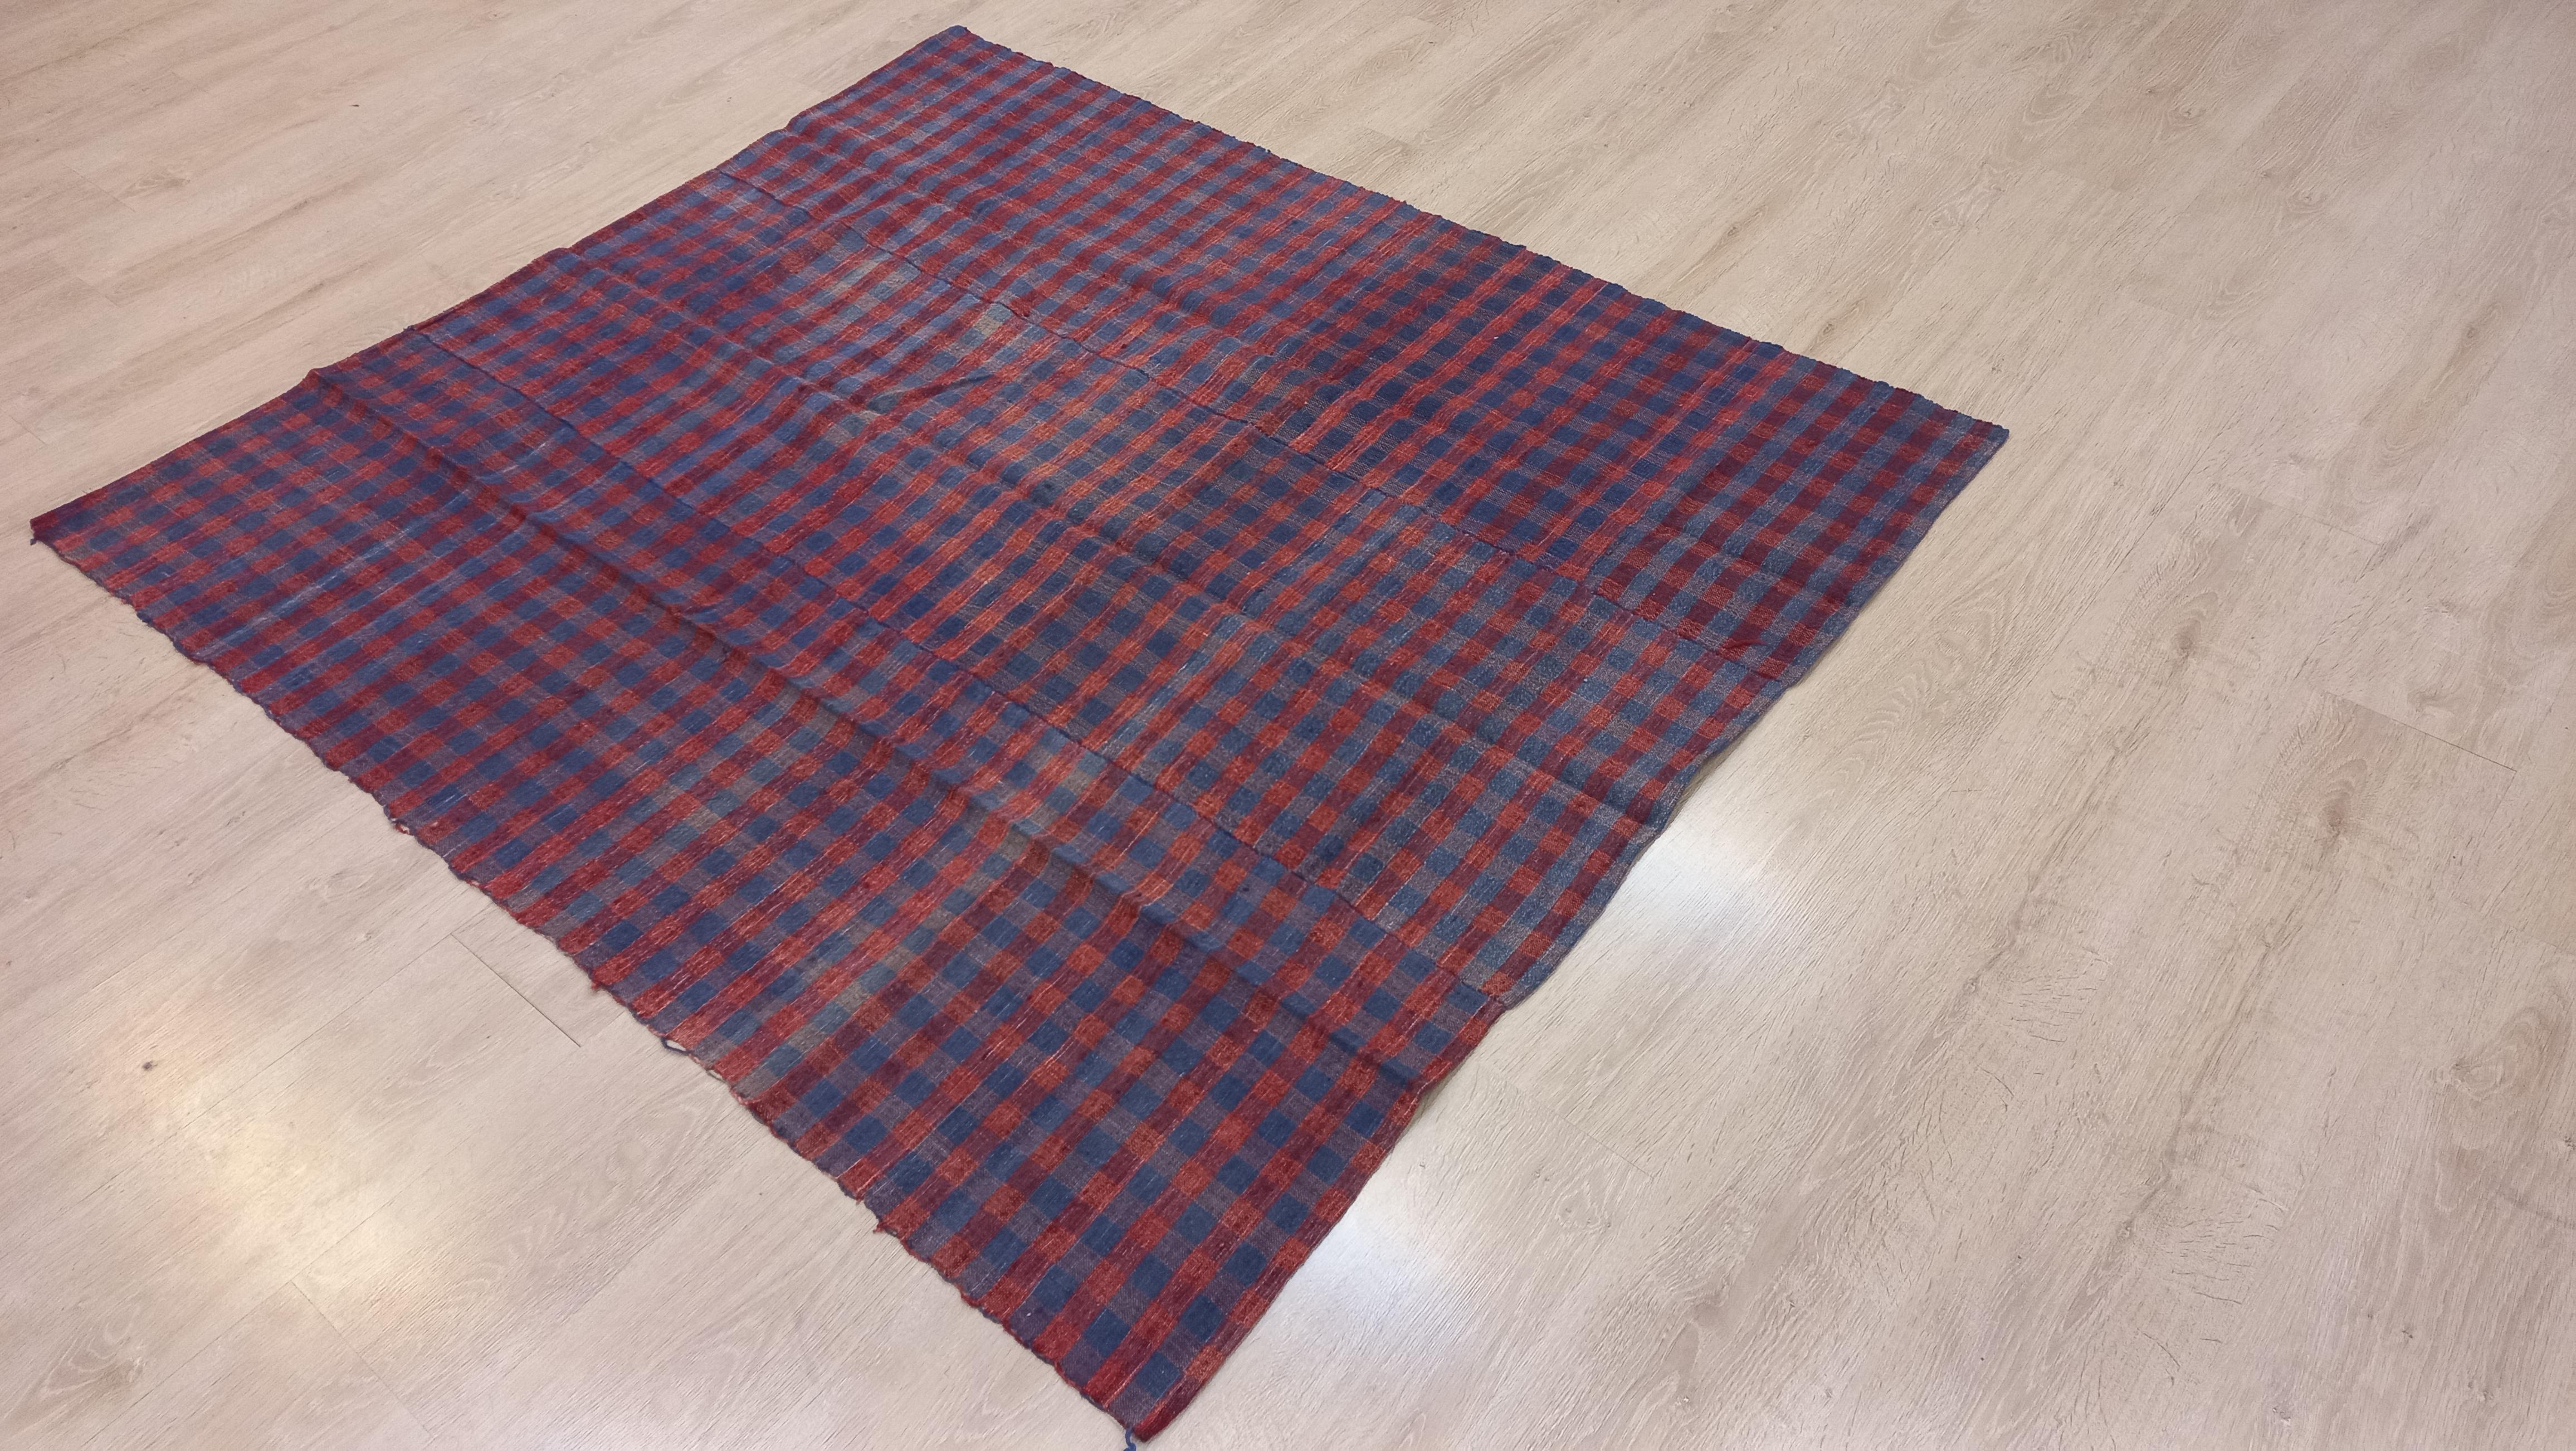 20th Century 4.5x5 ft Vintage Checkered Kilim in Red & Blue, Decorative Handmade Home Textile